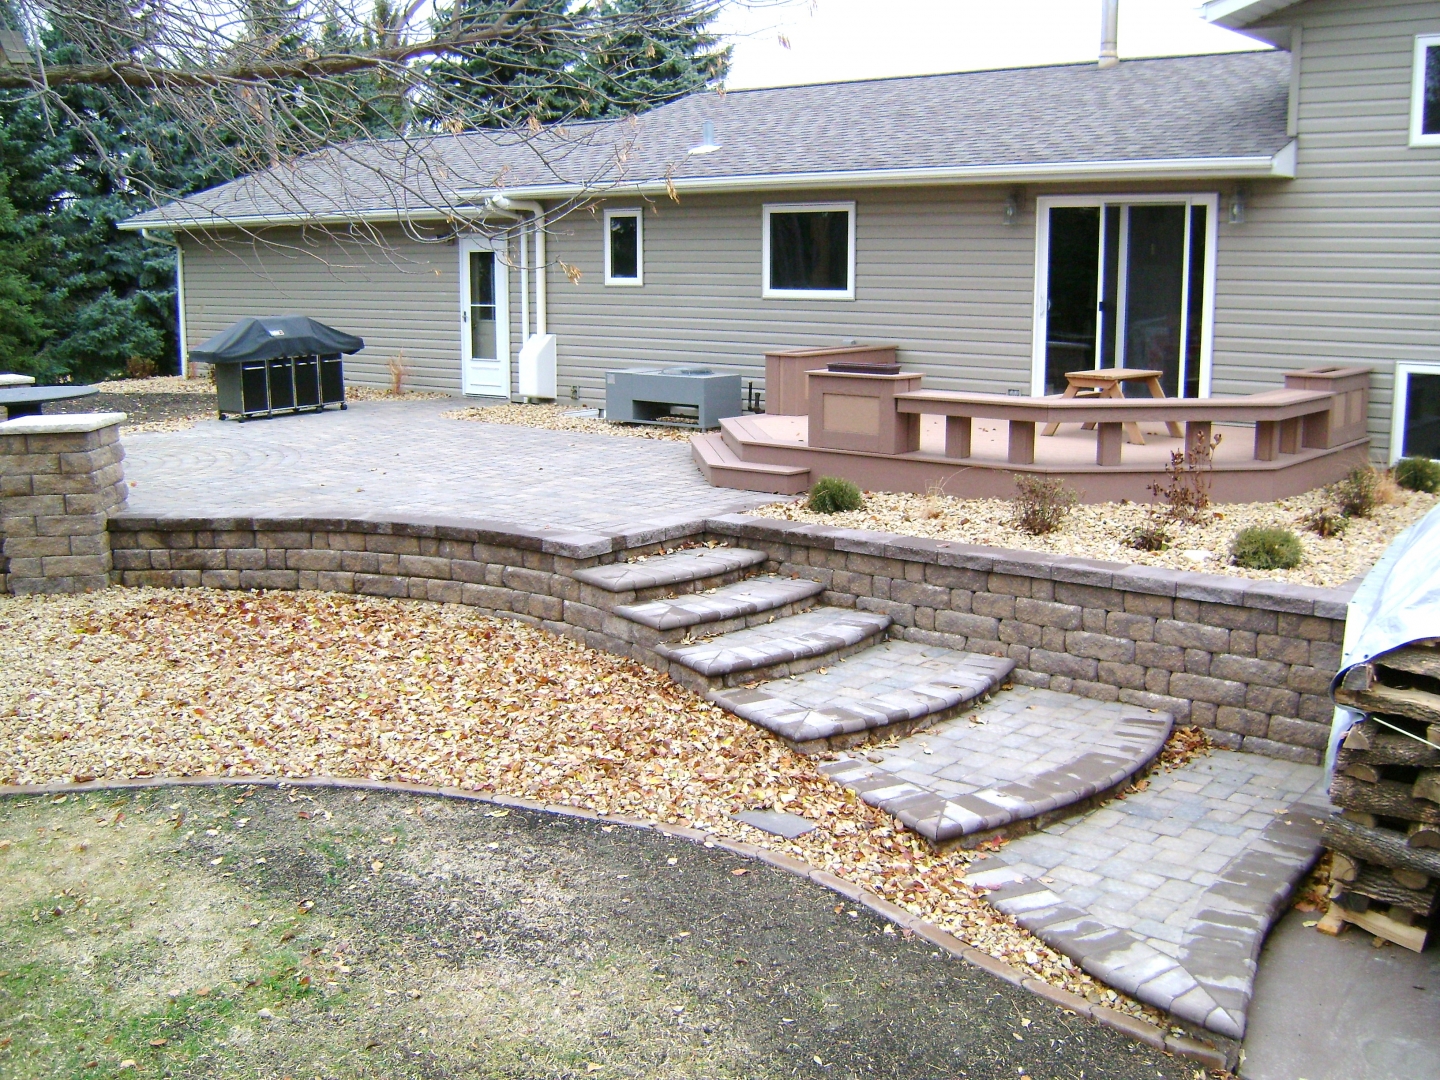 Raised Paver Patio with Retaining Walls, Stairs, Deck, and Seating Wall